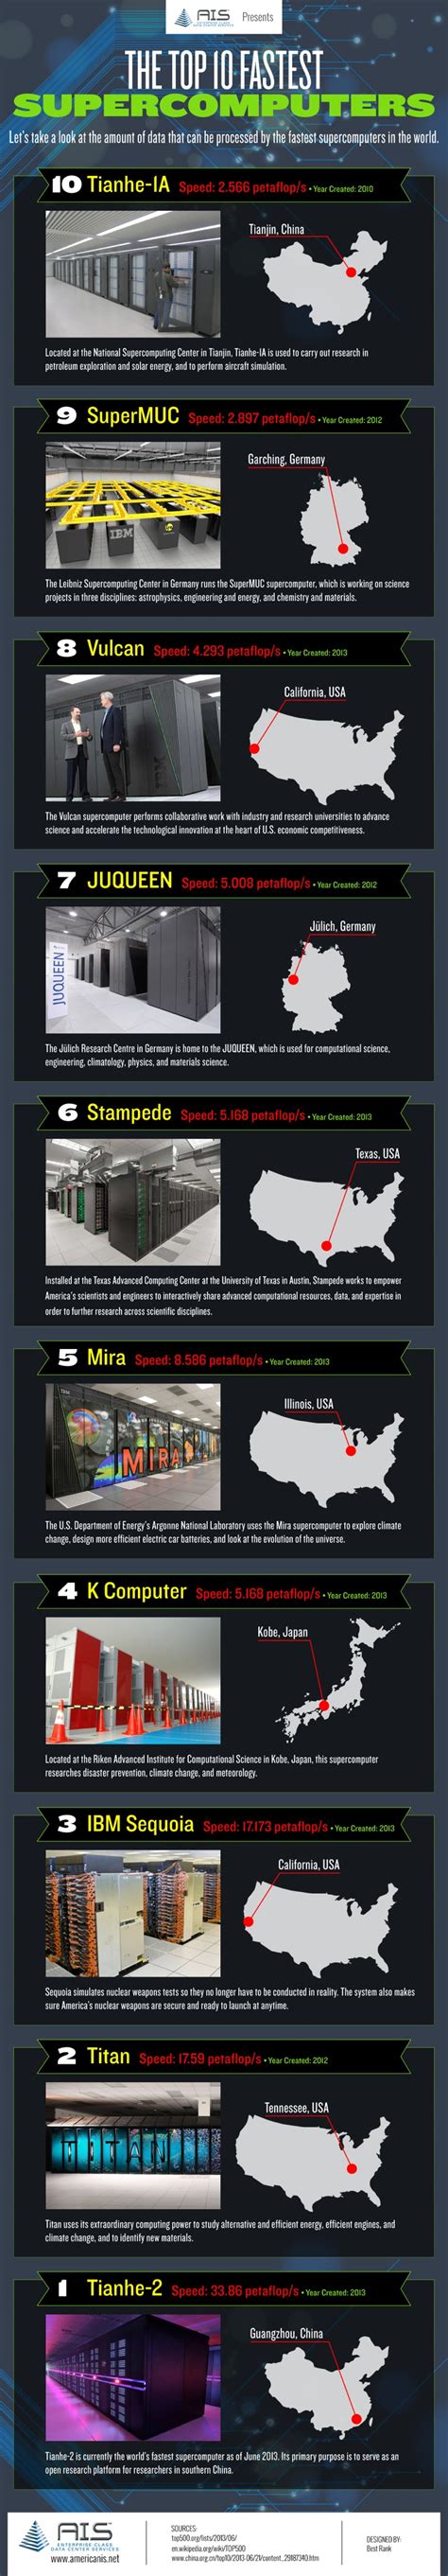 The project was started in 1993 and publishes an updated list of the supercomputers twice. The 10 Fastest Supercomputers in the World [#Infographic ...